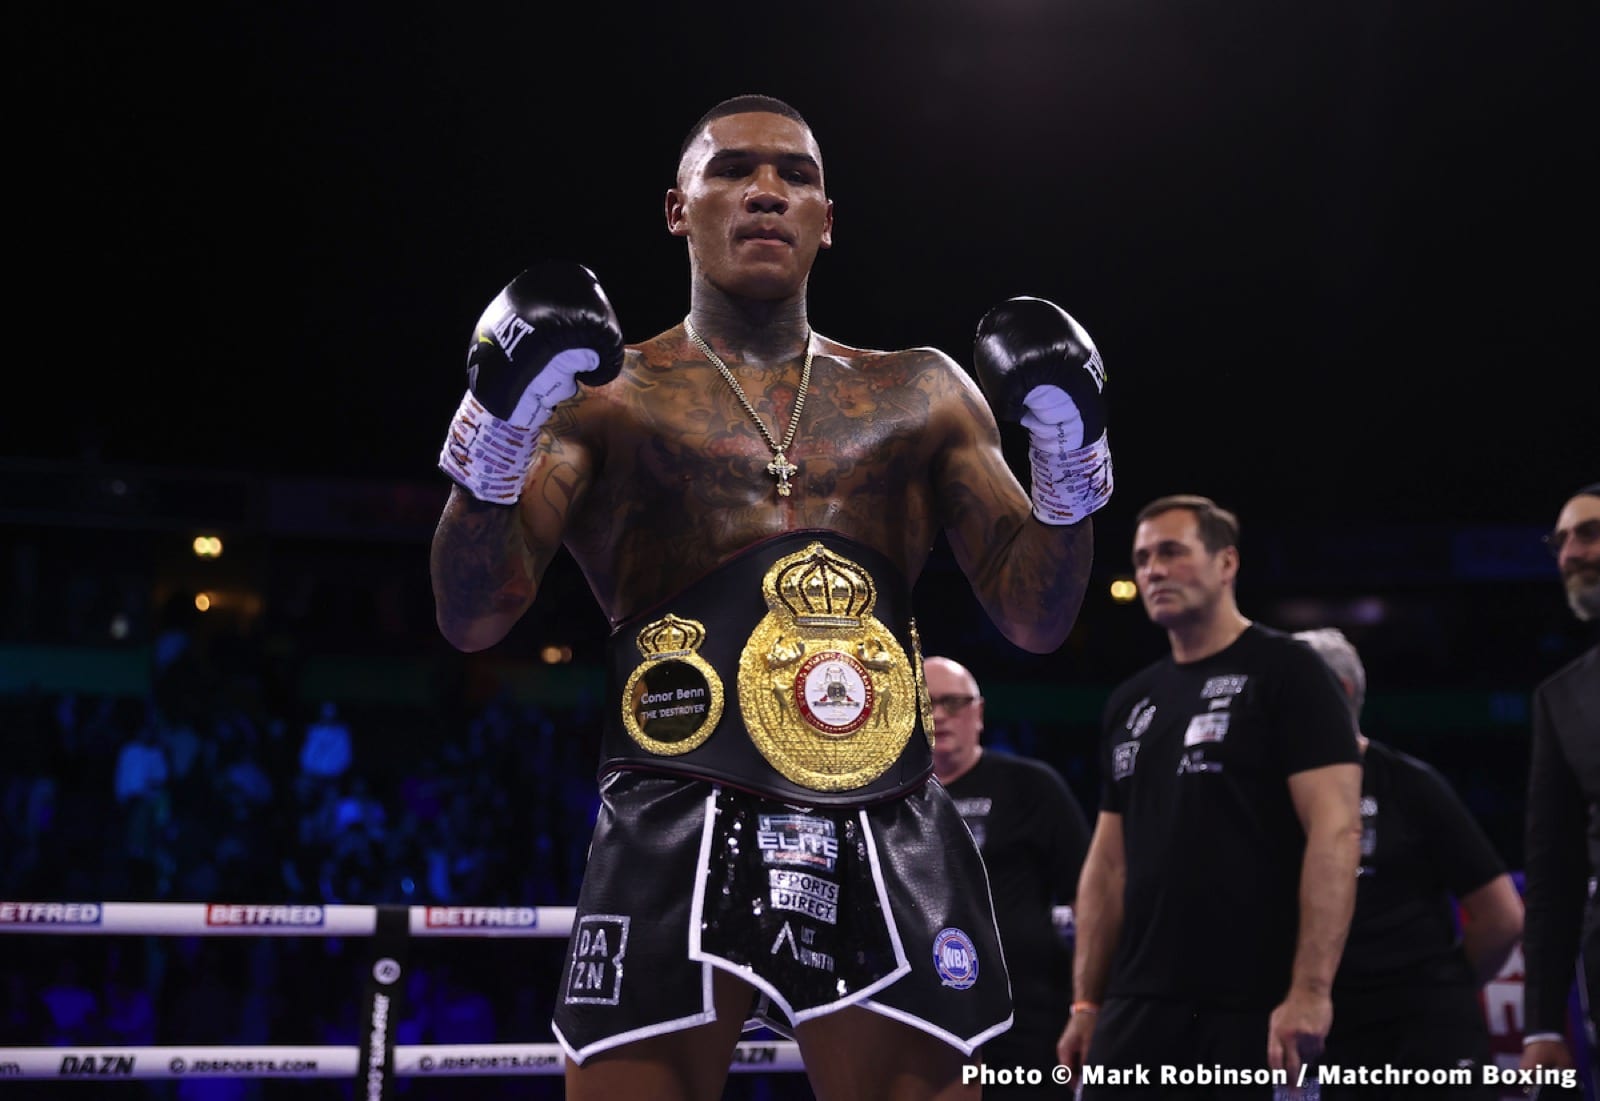 Image: Conor Benn has started his camp for next fight